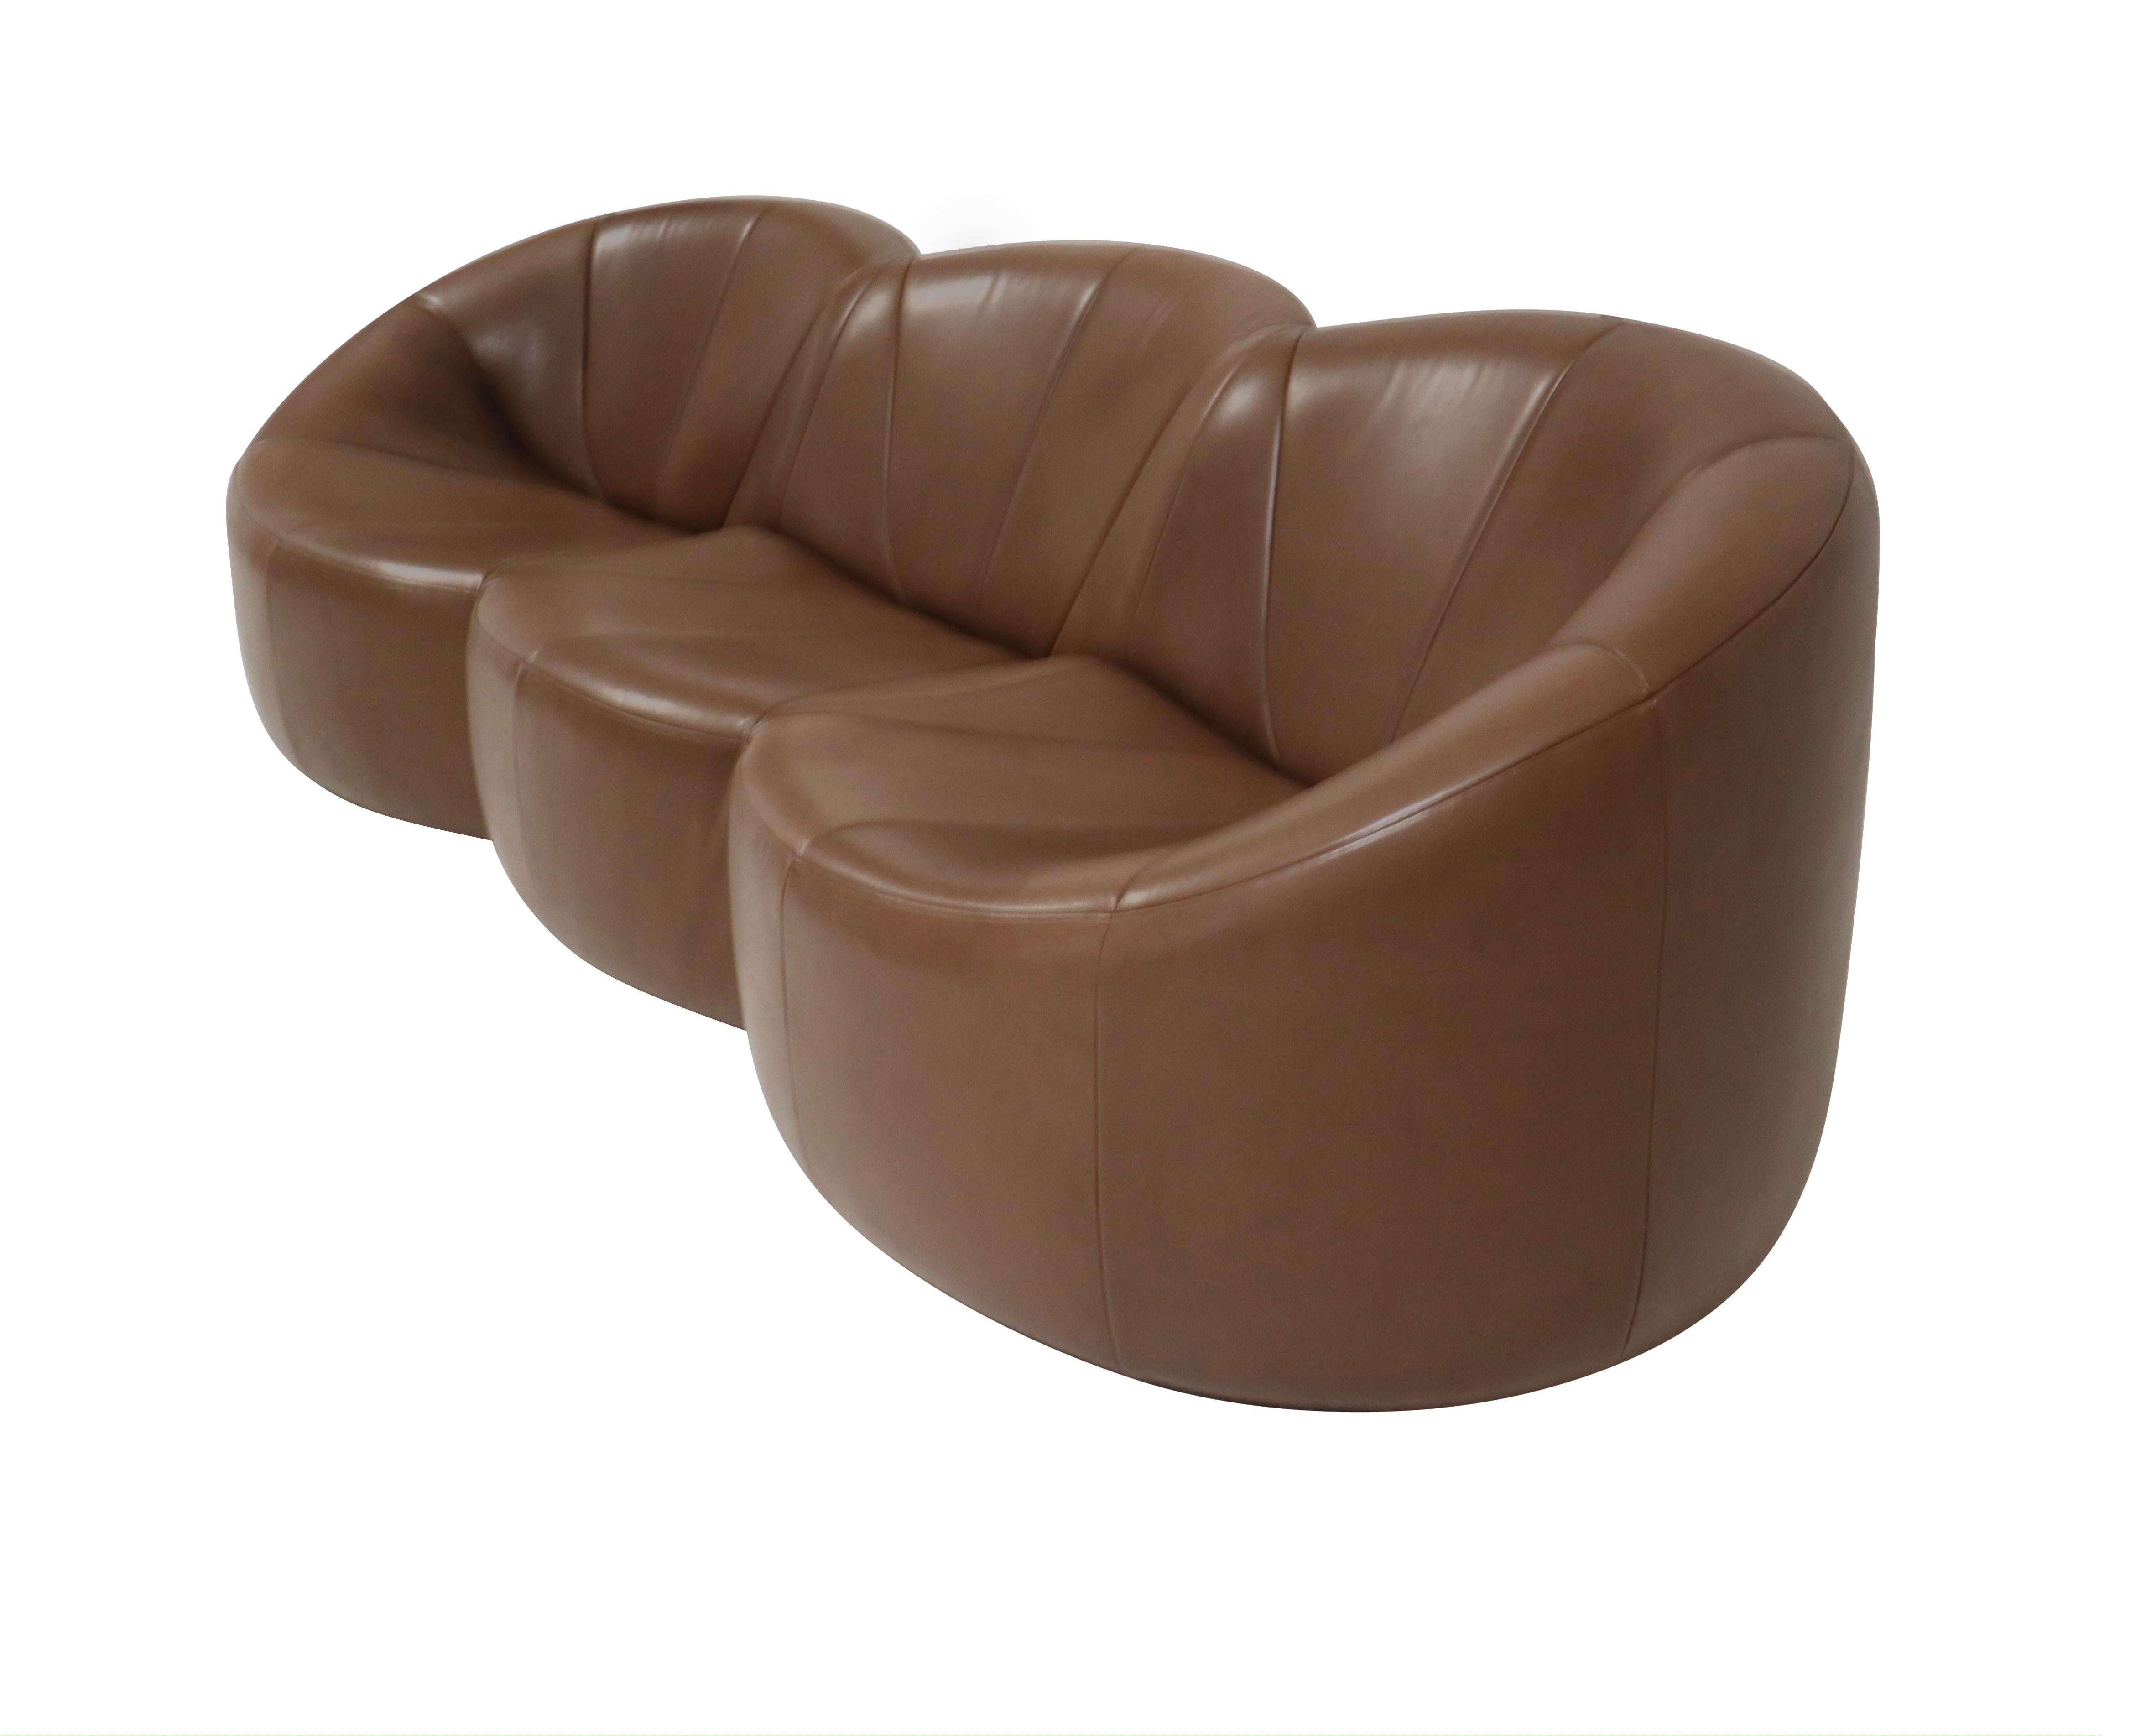 Pumpkin sofa by Pierre Paulin. Original leather is soft and supple.